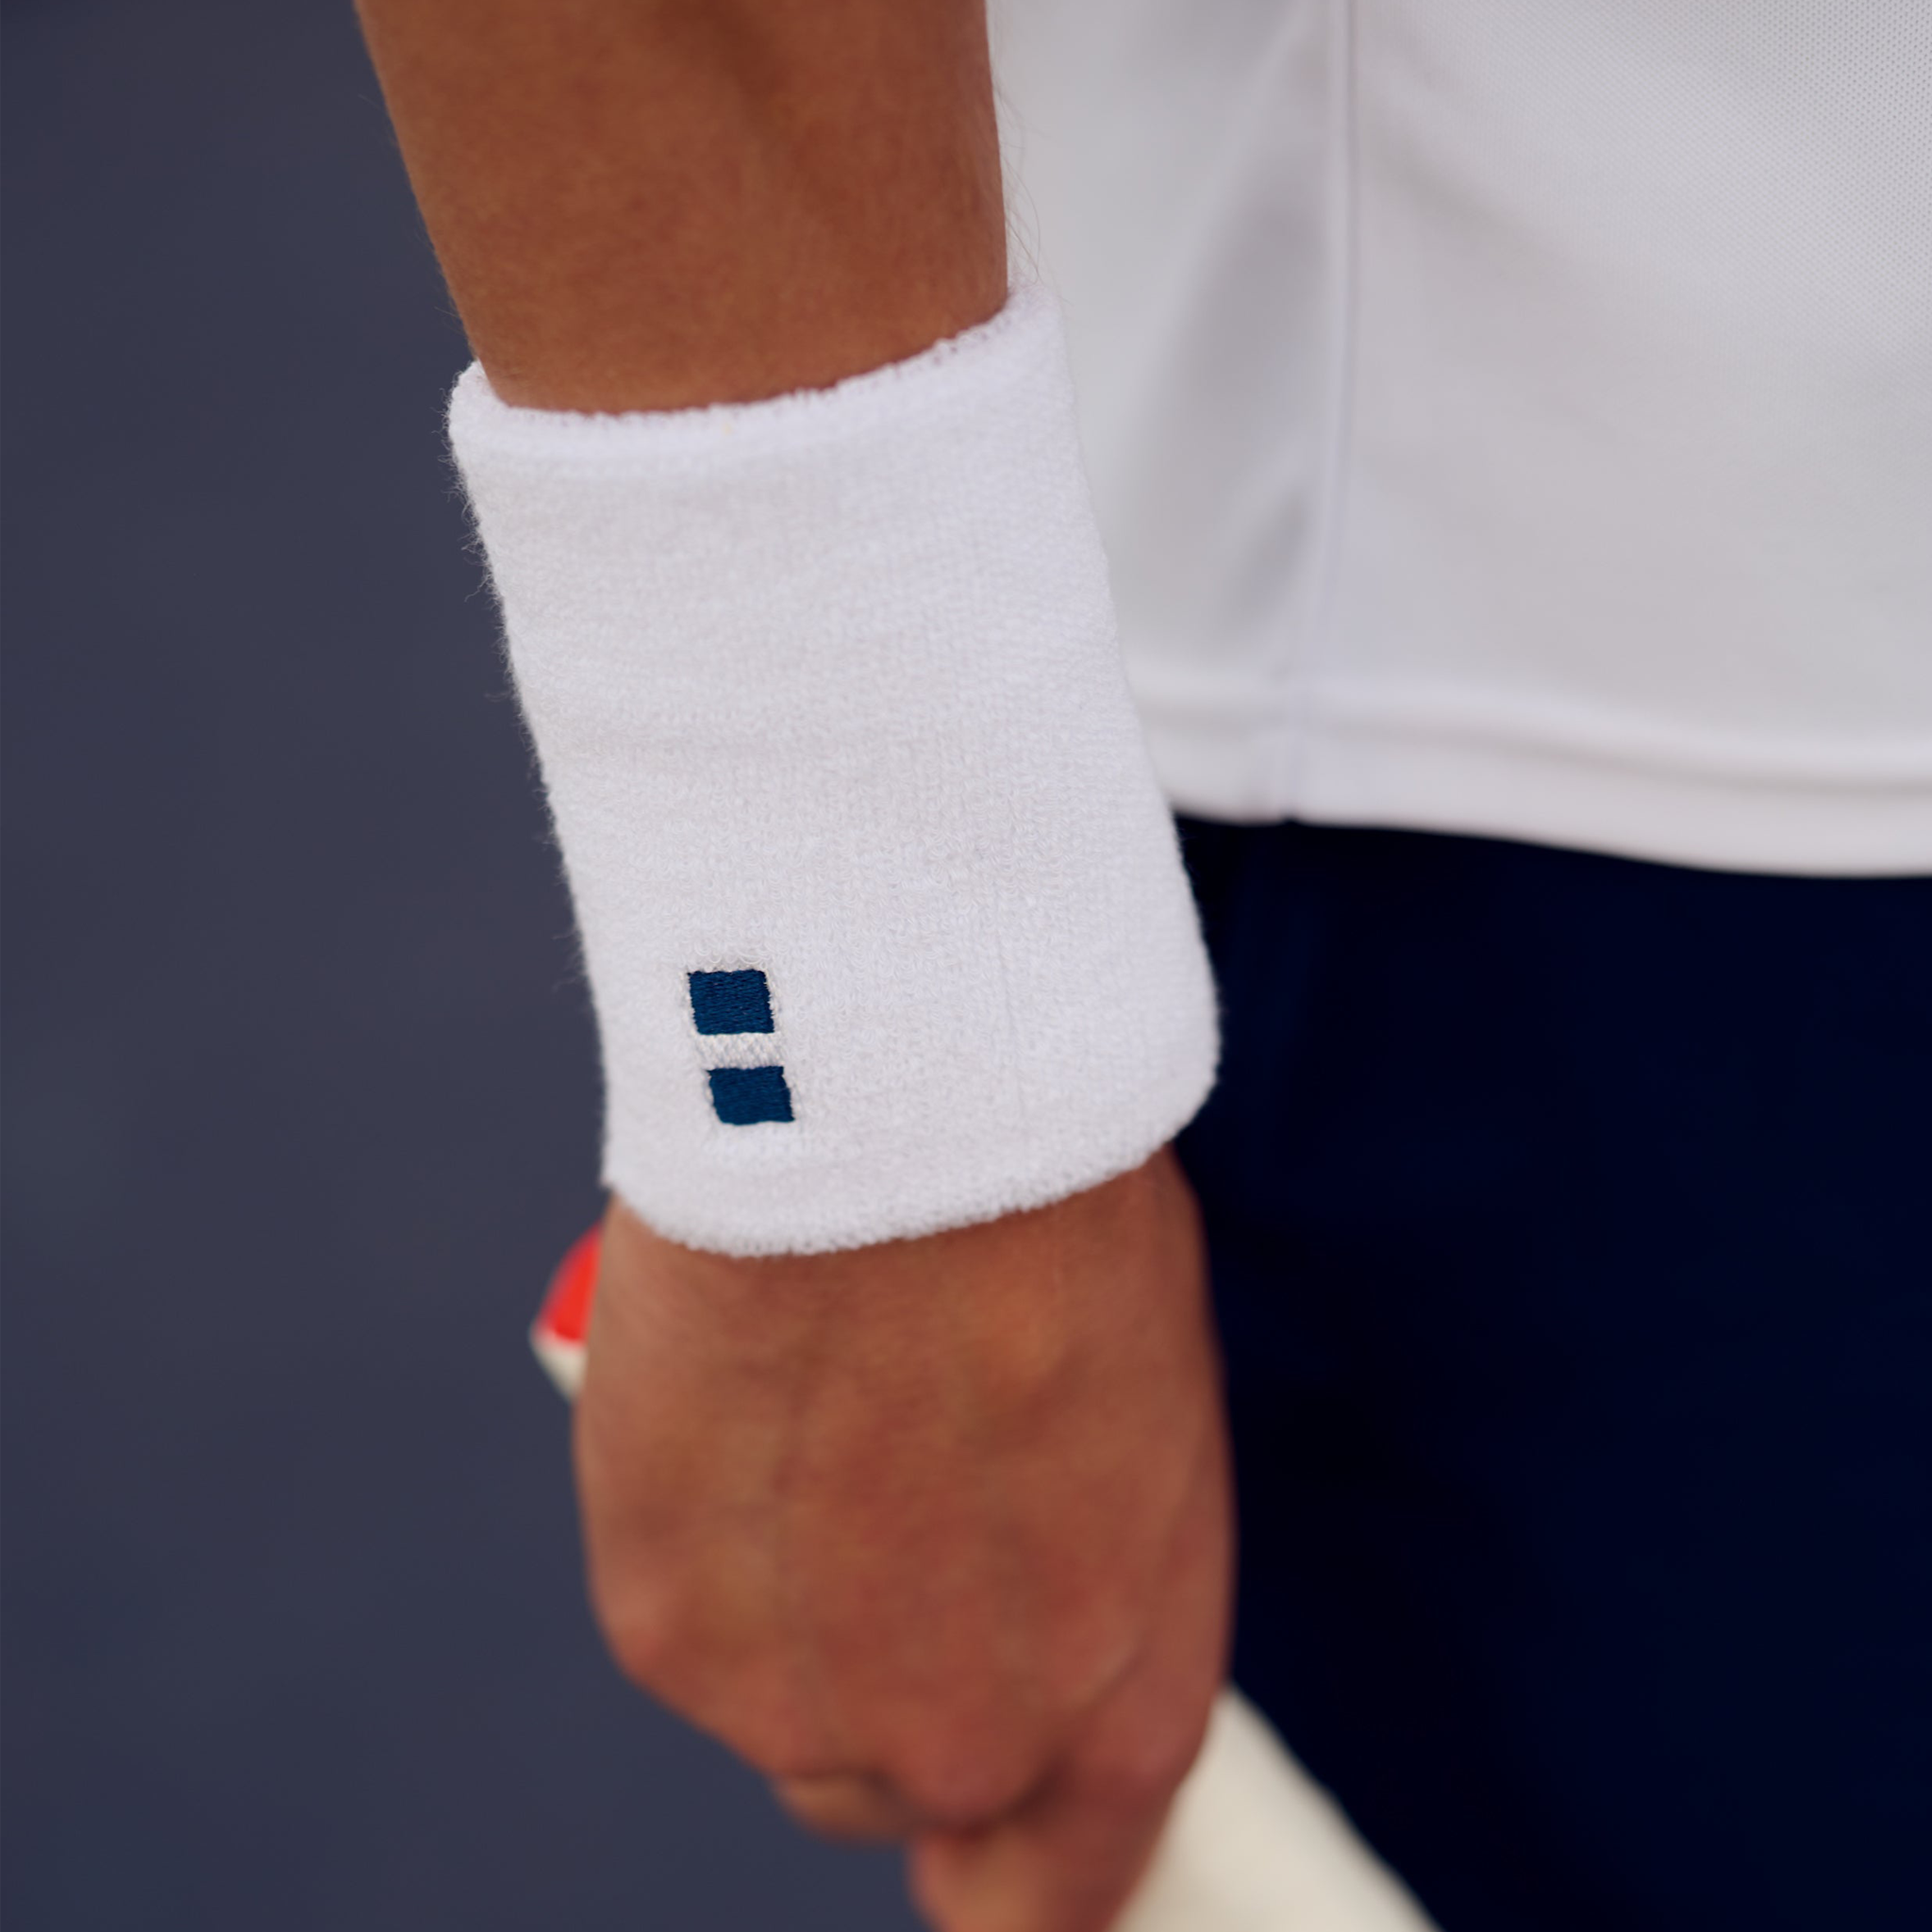 nordicdots Match Wristbands 4-Pack - White / Navy